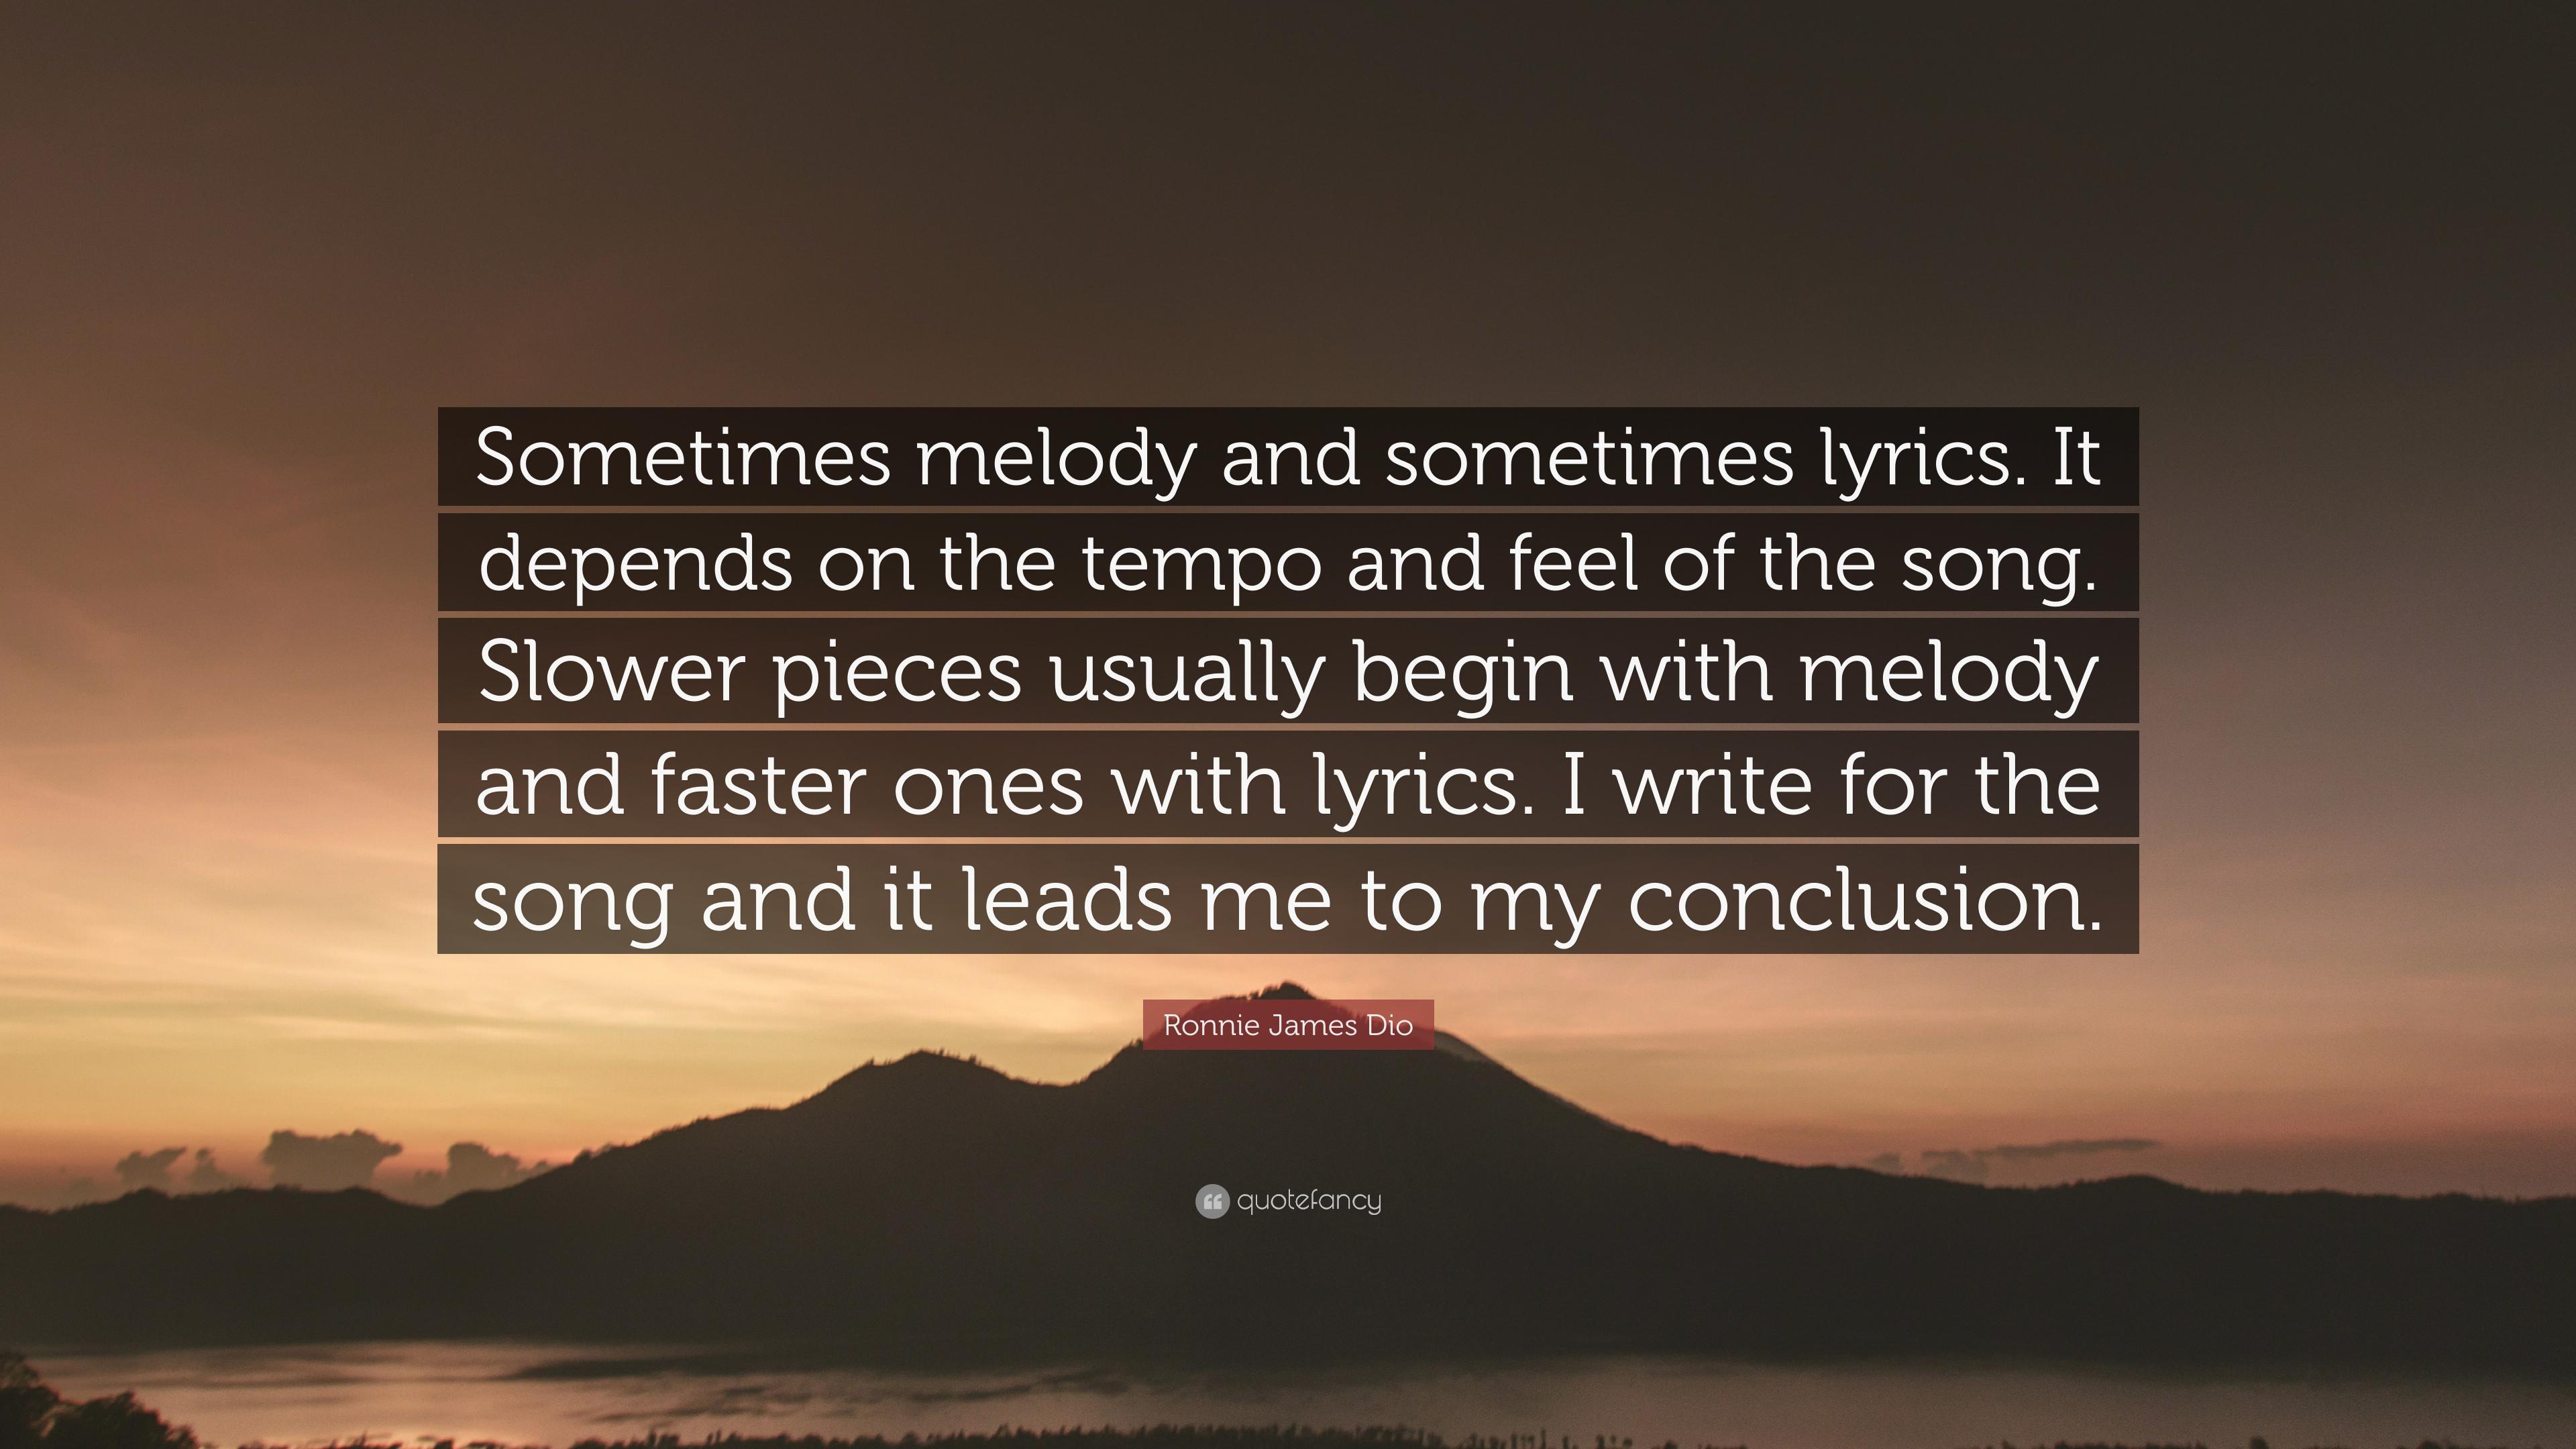 Ronnie James Dio Quote: “Sometimes melody and sometimes lyrics. It